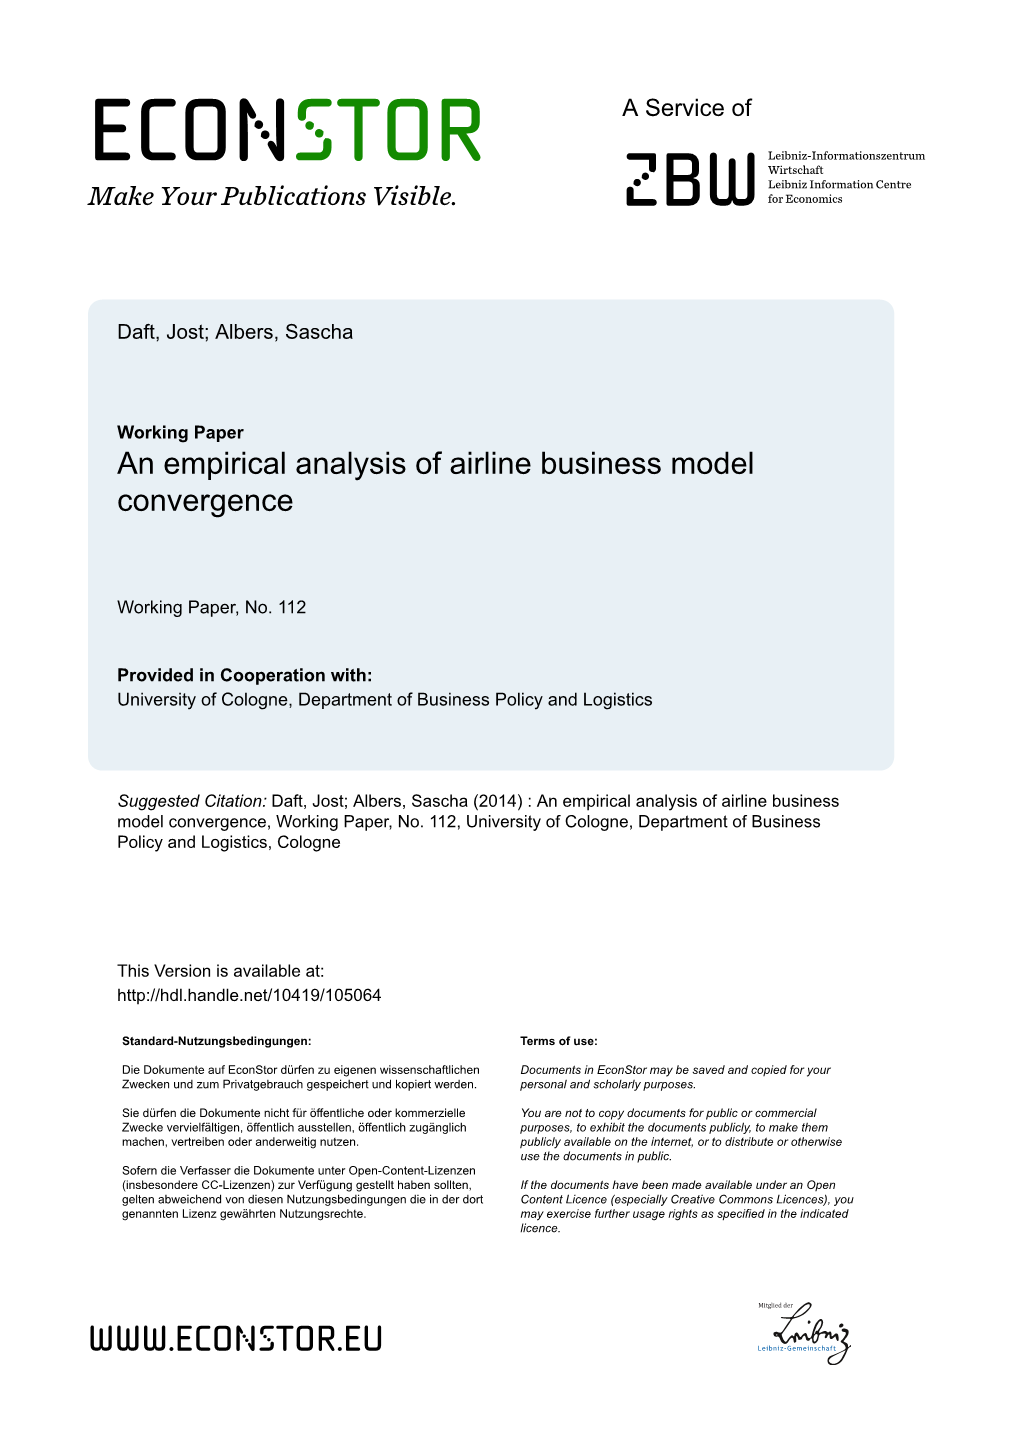 An Empirical Analysis of Airline Business Model Convergence